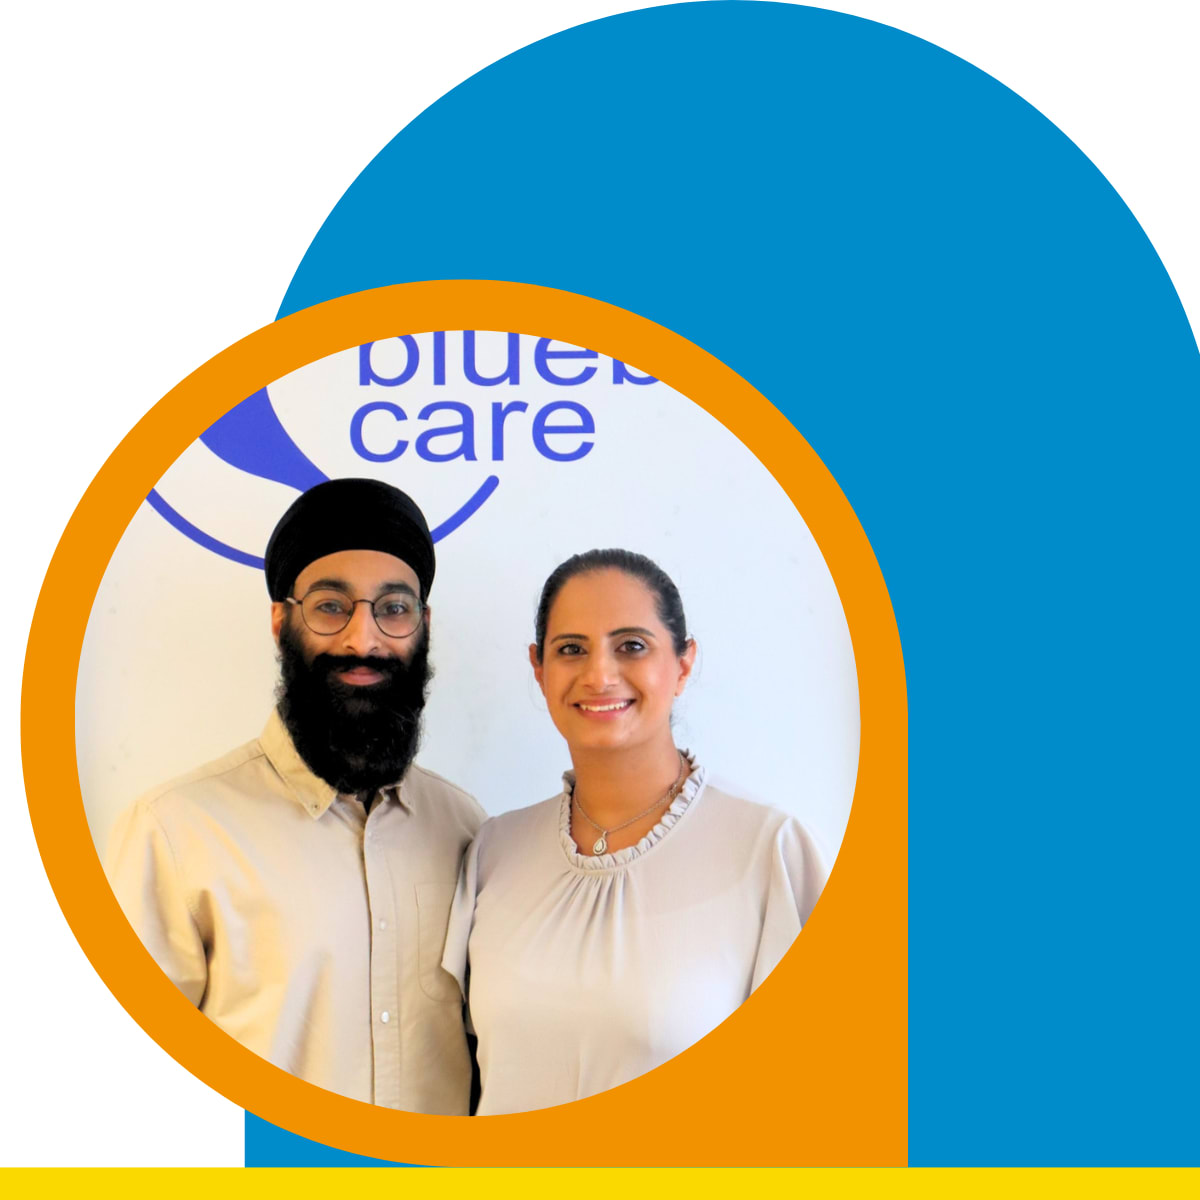 Ranjot and Baljit Khatra recently joined the Bluebird Care family as they opened our Bromsgrove and Redditch office. They are passionate about delivering quality home care and putting families' minds at ease. 🫶 Read more here: homecareinsight.co.uk/new-ownership-…